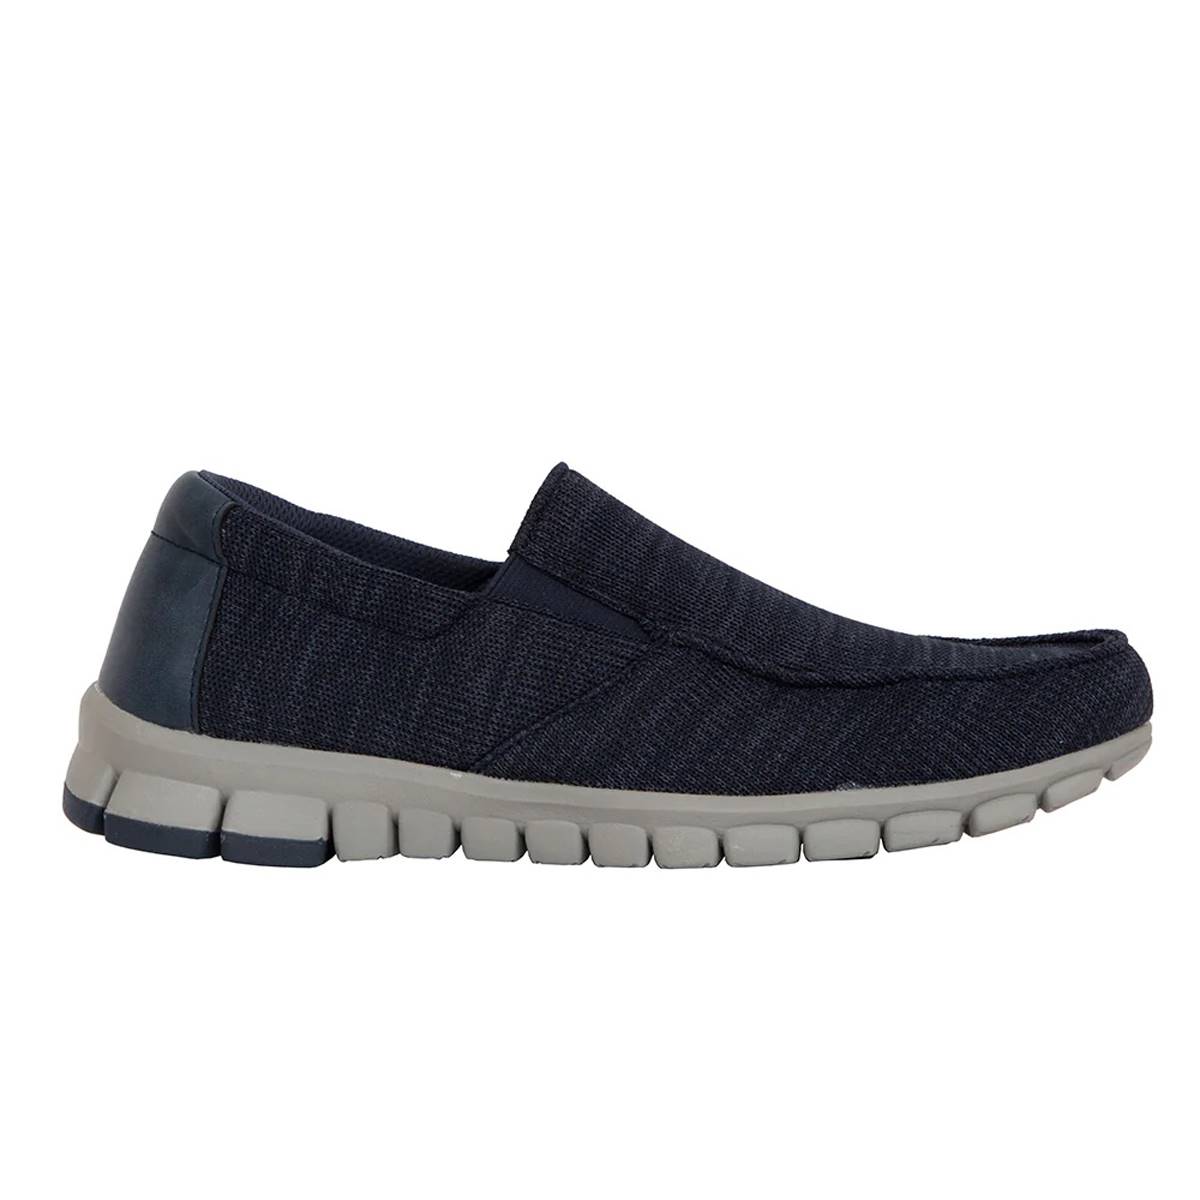 Mens Deer Stags(R) Melvin2 Knit Fashion Sneakers